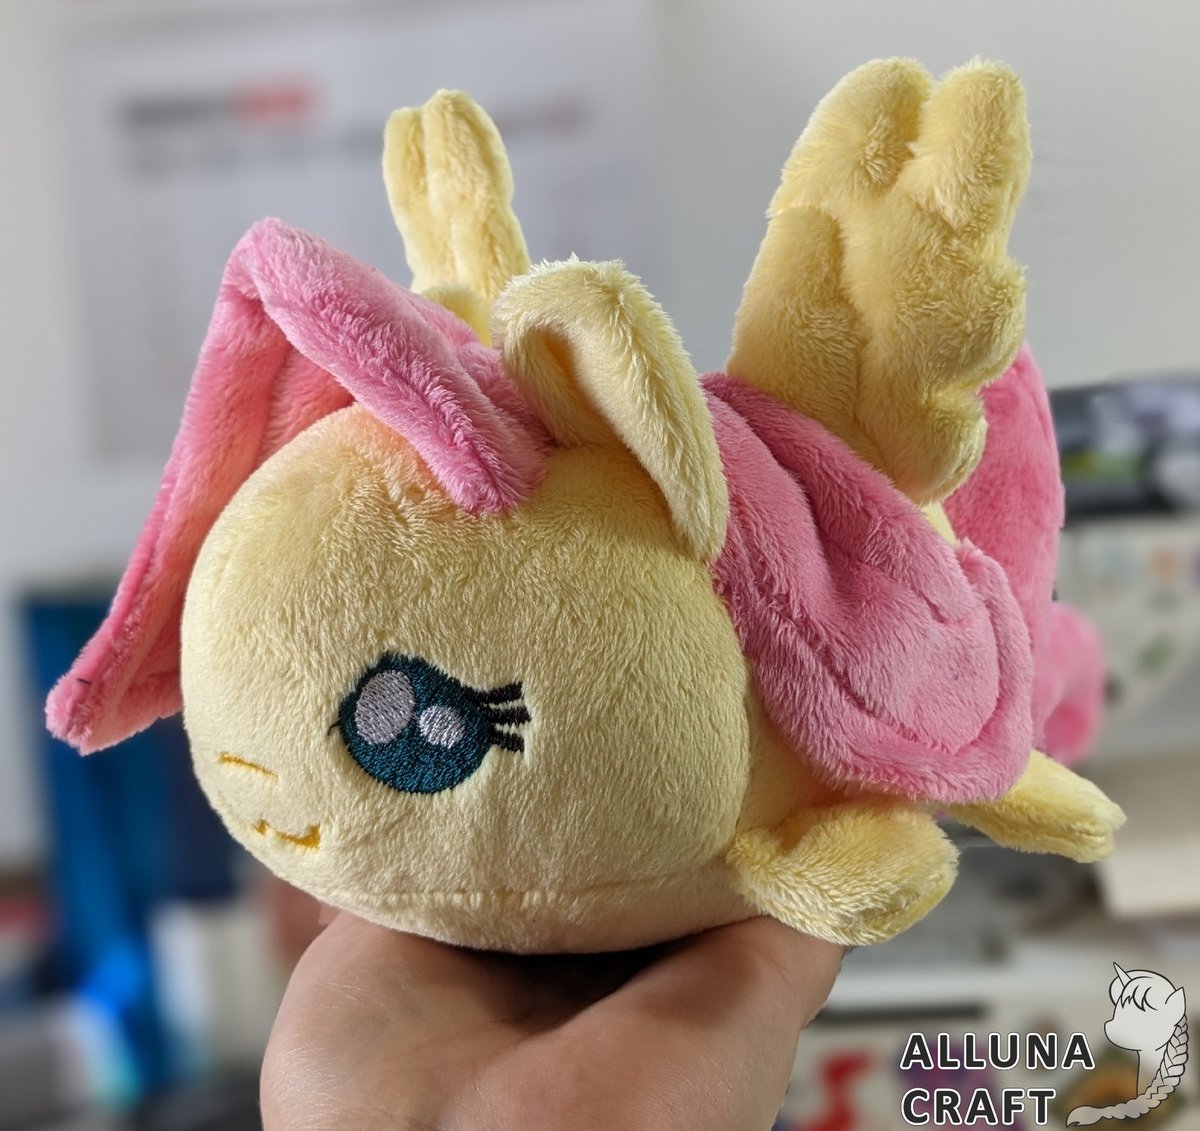 Derpy Hooves and Fluttershy (loaf version) for sale ^^
~15cm long 
Price for each $60 + shipping 20$
Payment via  PayPal.    
#mlp #mlpplush #pony #ponyplush #plushtoy  #plushie #cutie #mylittlepony #handmade #plush #MLP #MLPFiM #Brony #DerpyHooves #Fluttershy